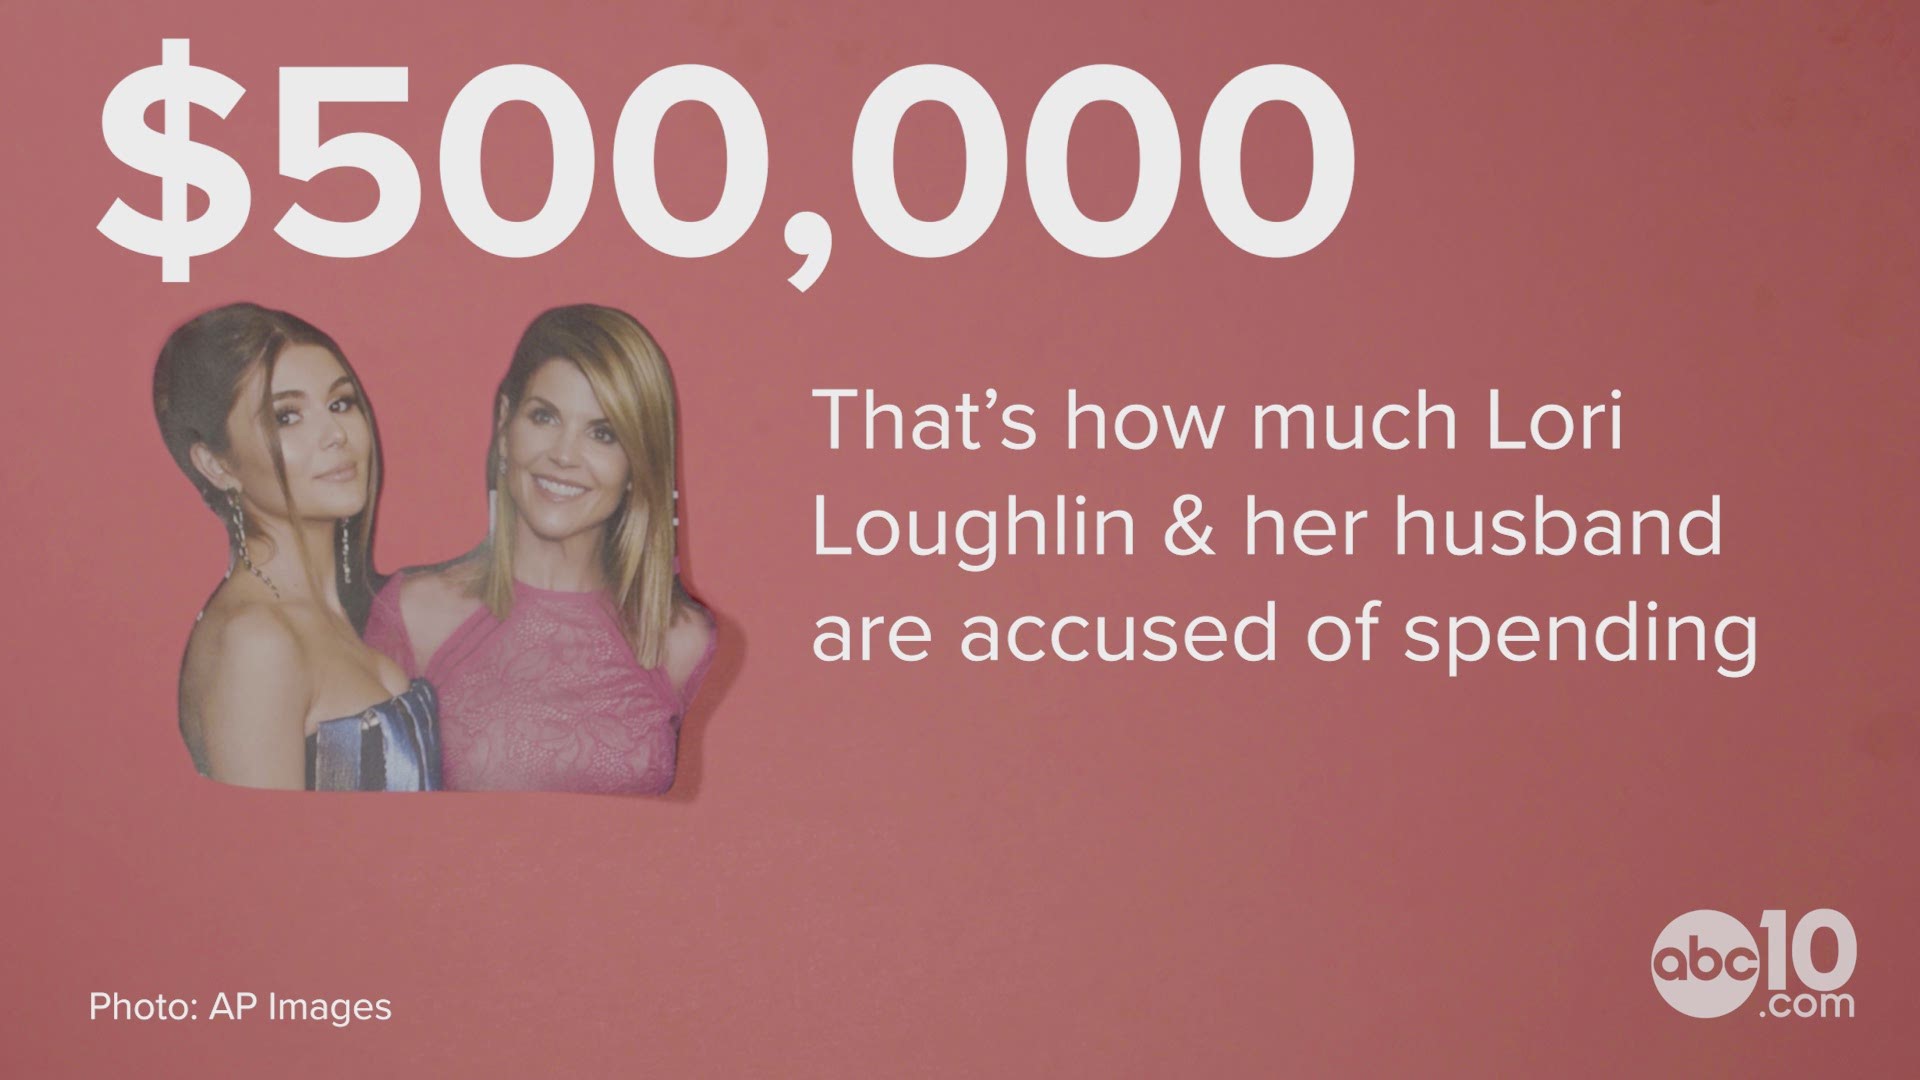 $500,000: That's how much Lori Loughlin and her husband are accused of spending in the college admissions scandal. We broke down USC tuition and found out that the money she may have spent before her kids were accepted, could have paid for two undergrad degrees at USC. 

Read more about "Operation Varsity Blues" here: https://bit.ly/2O3c2aF